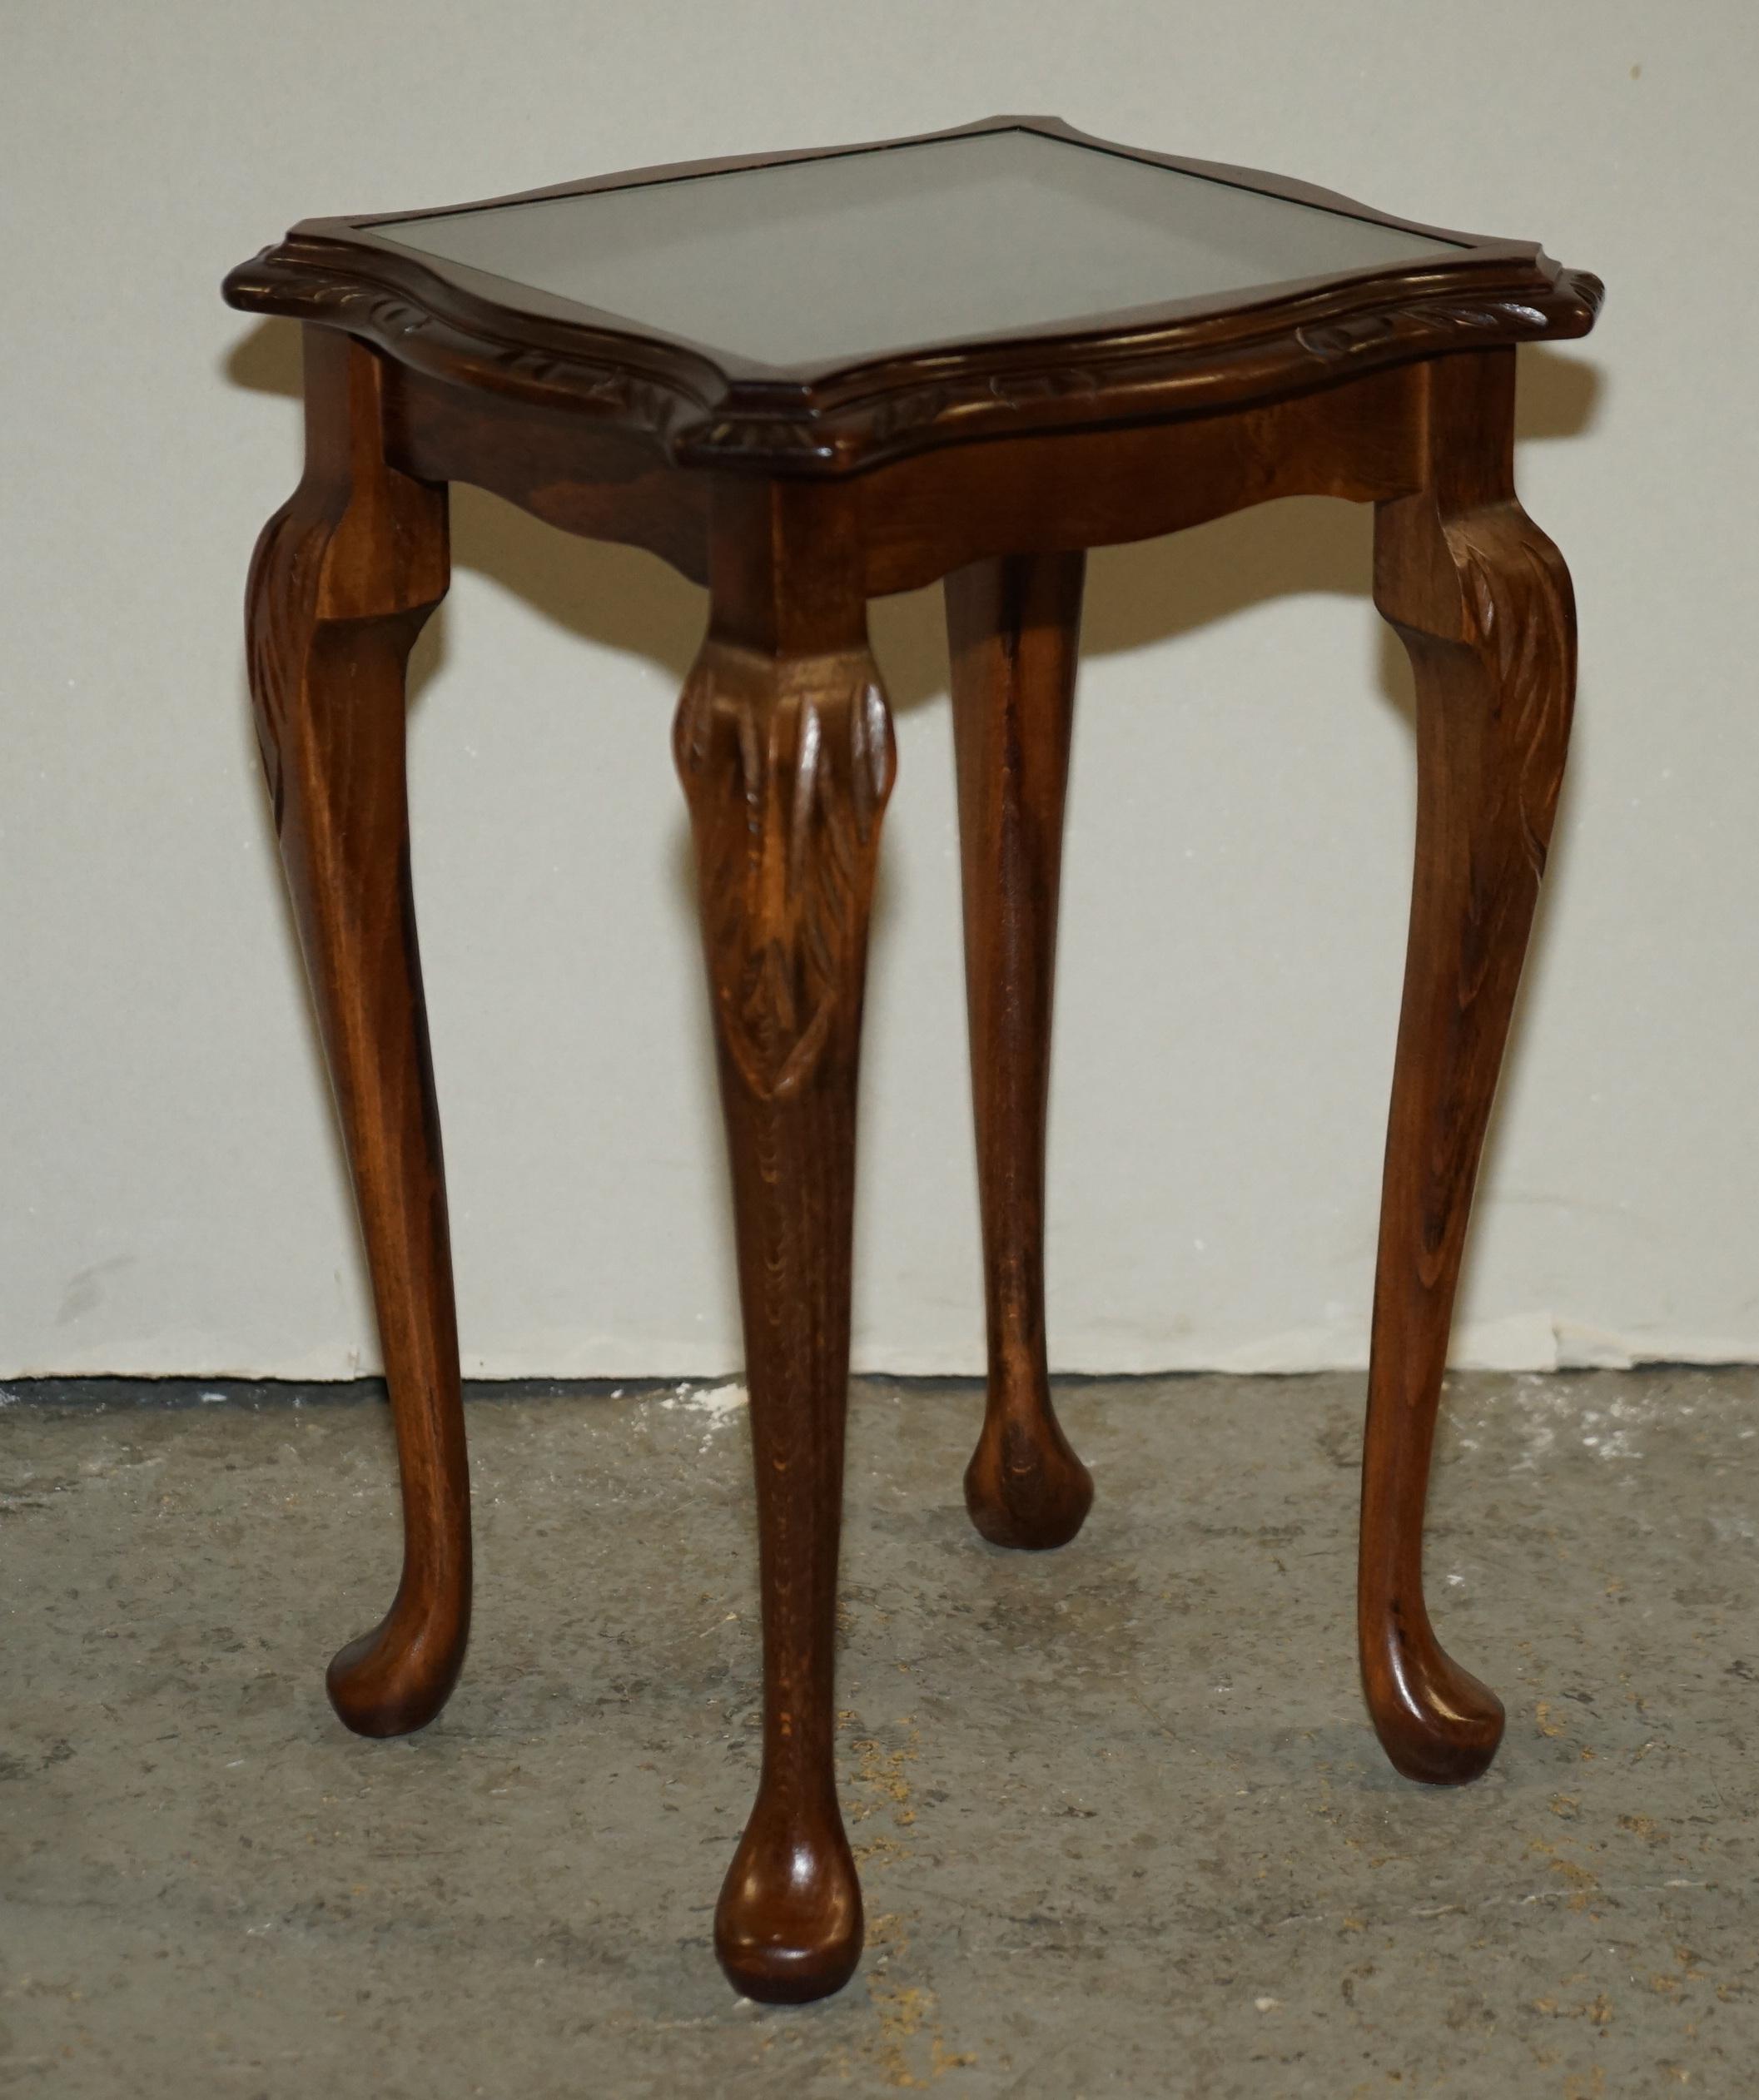 Vintage Nest of 3 Stacking Tables Solid Hardwood, Glass Tops & Carved Legs 12